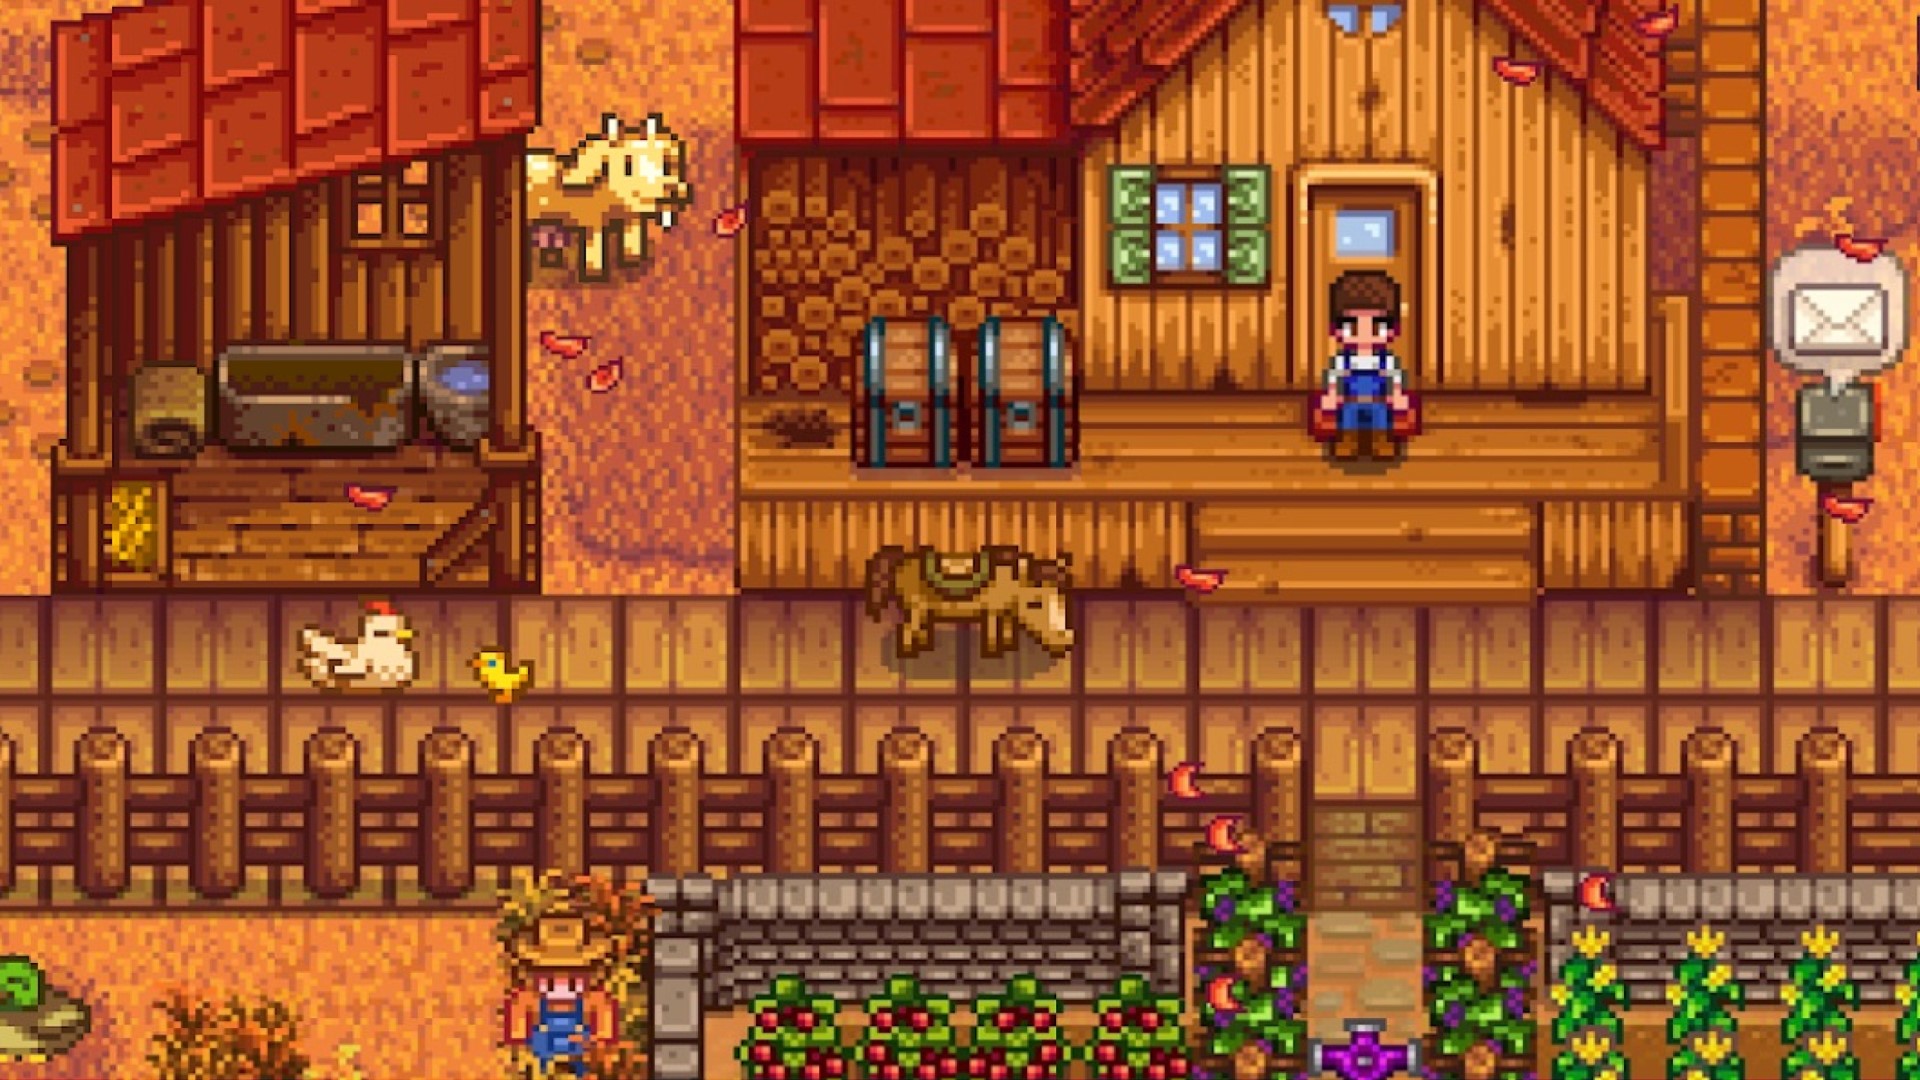 Best Android games: Stardew Valley. Image shows a pixelated farmhouse with a cow, chicken, and farmer taking a break